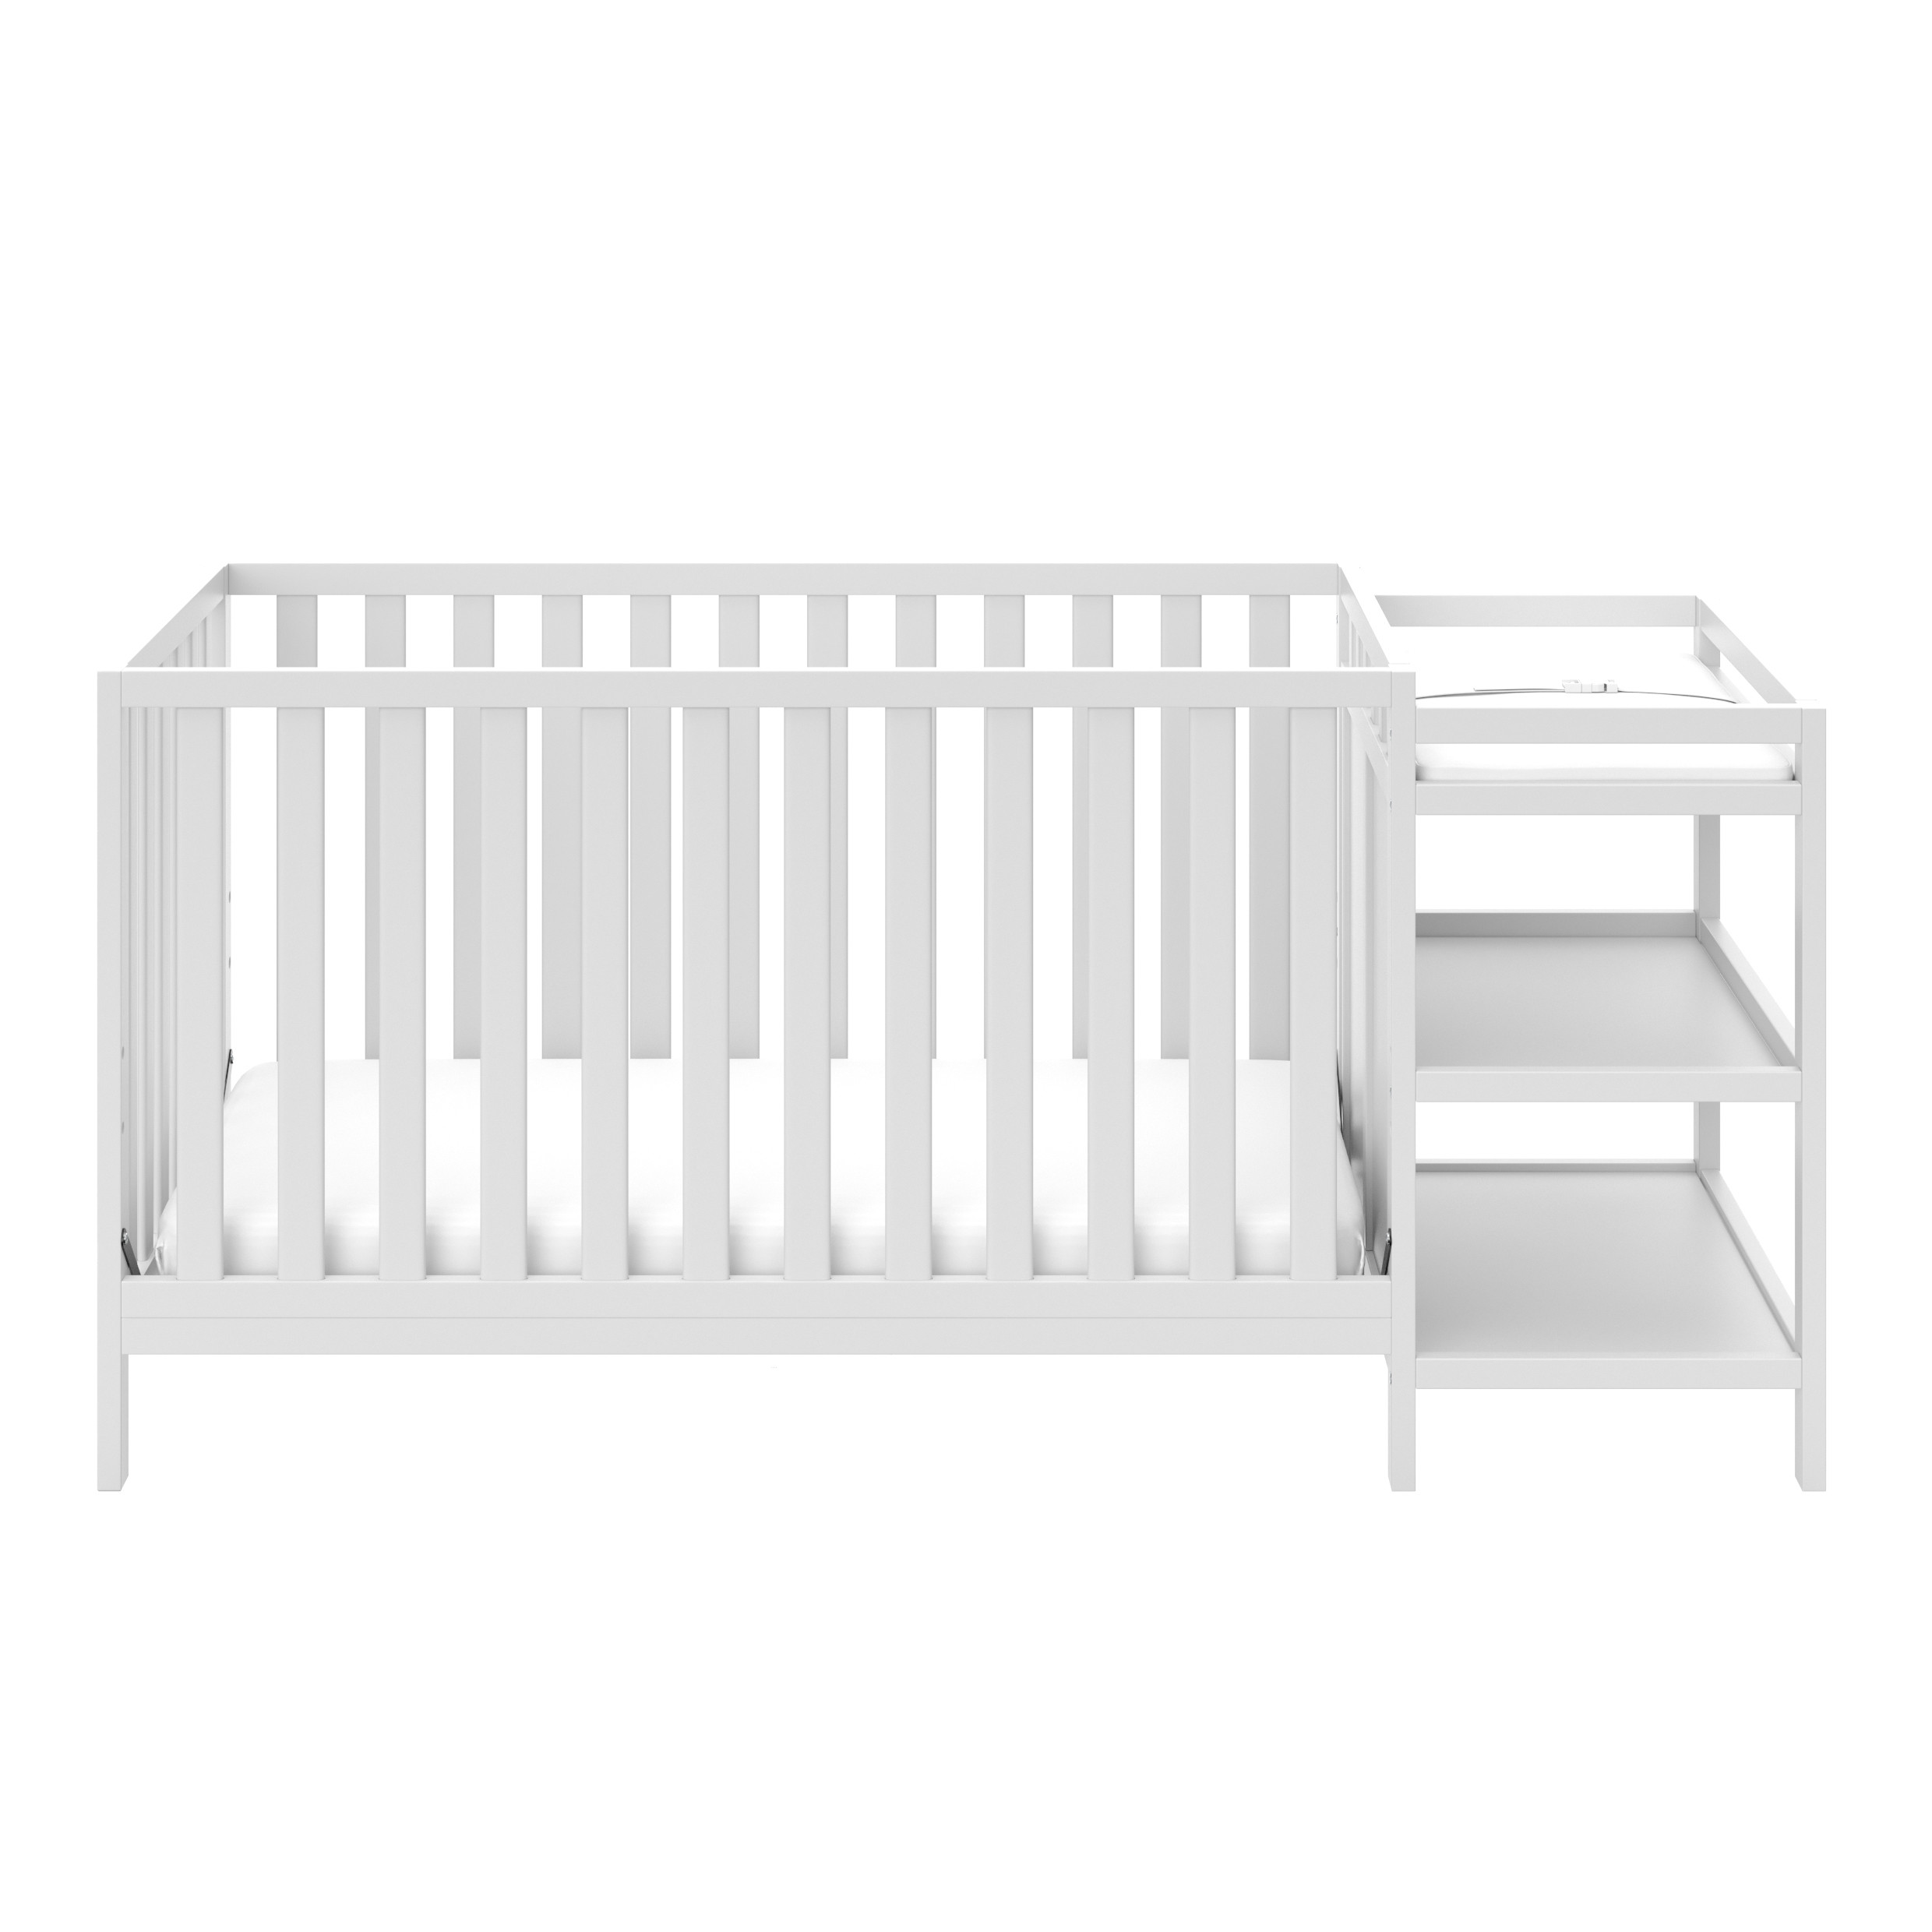 Child Craft Crib Recall
 Pacific 4 in 1 Convertible Crib and Changer